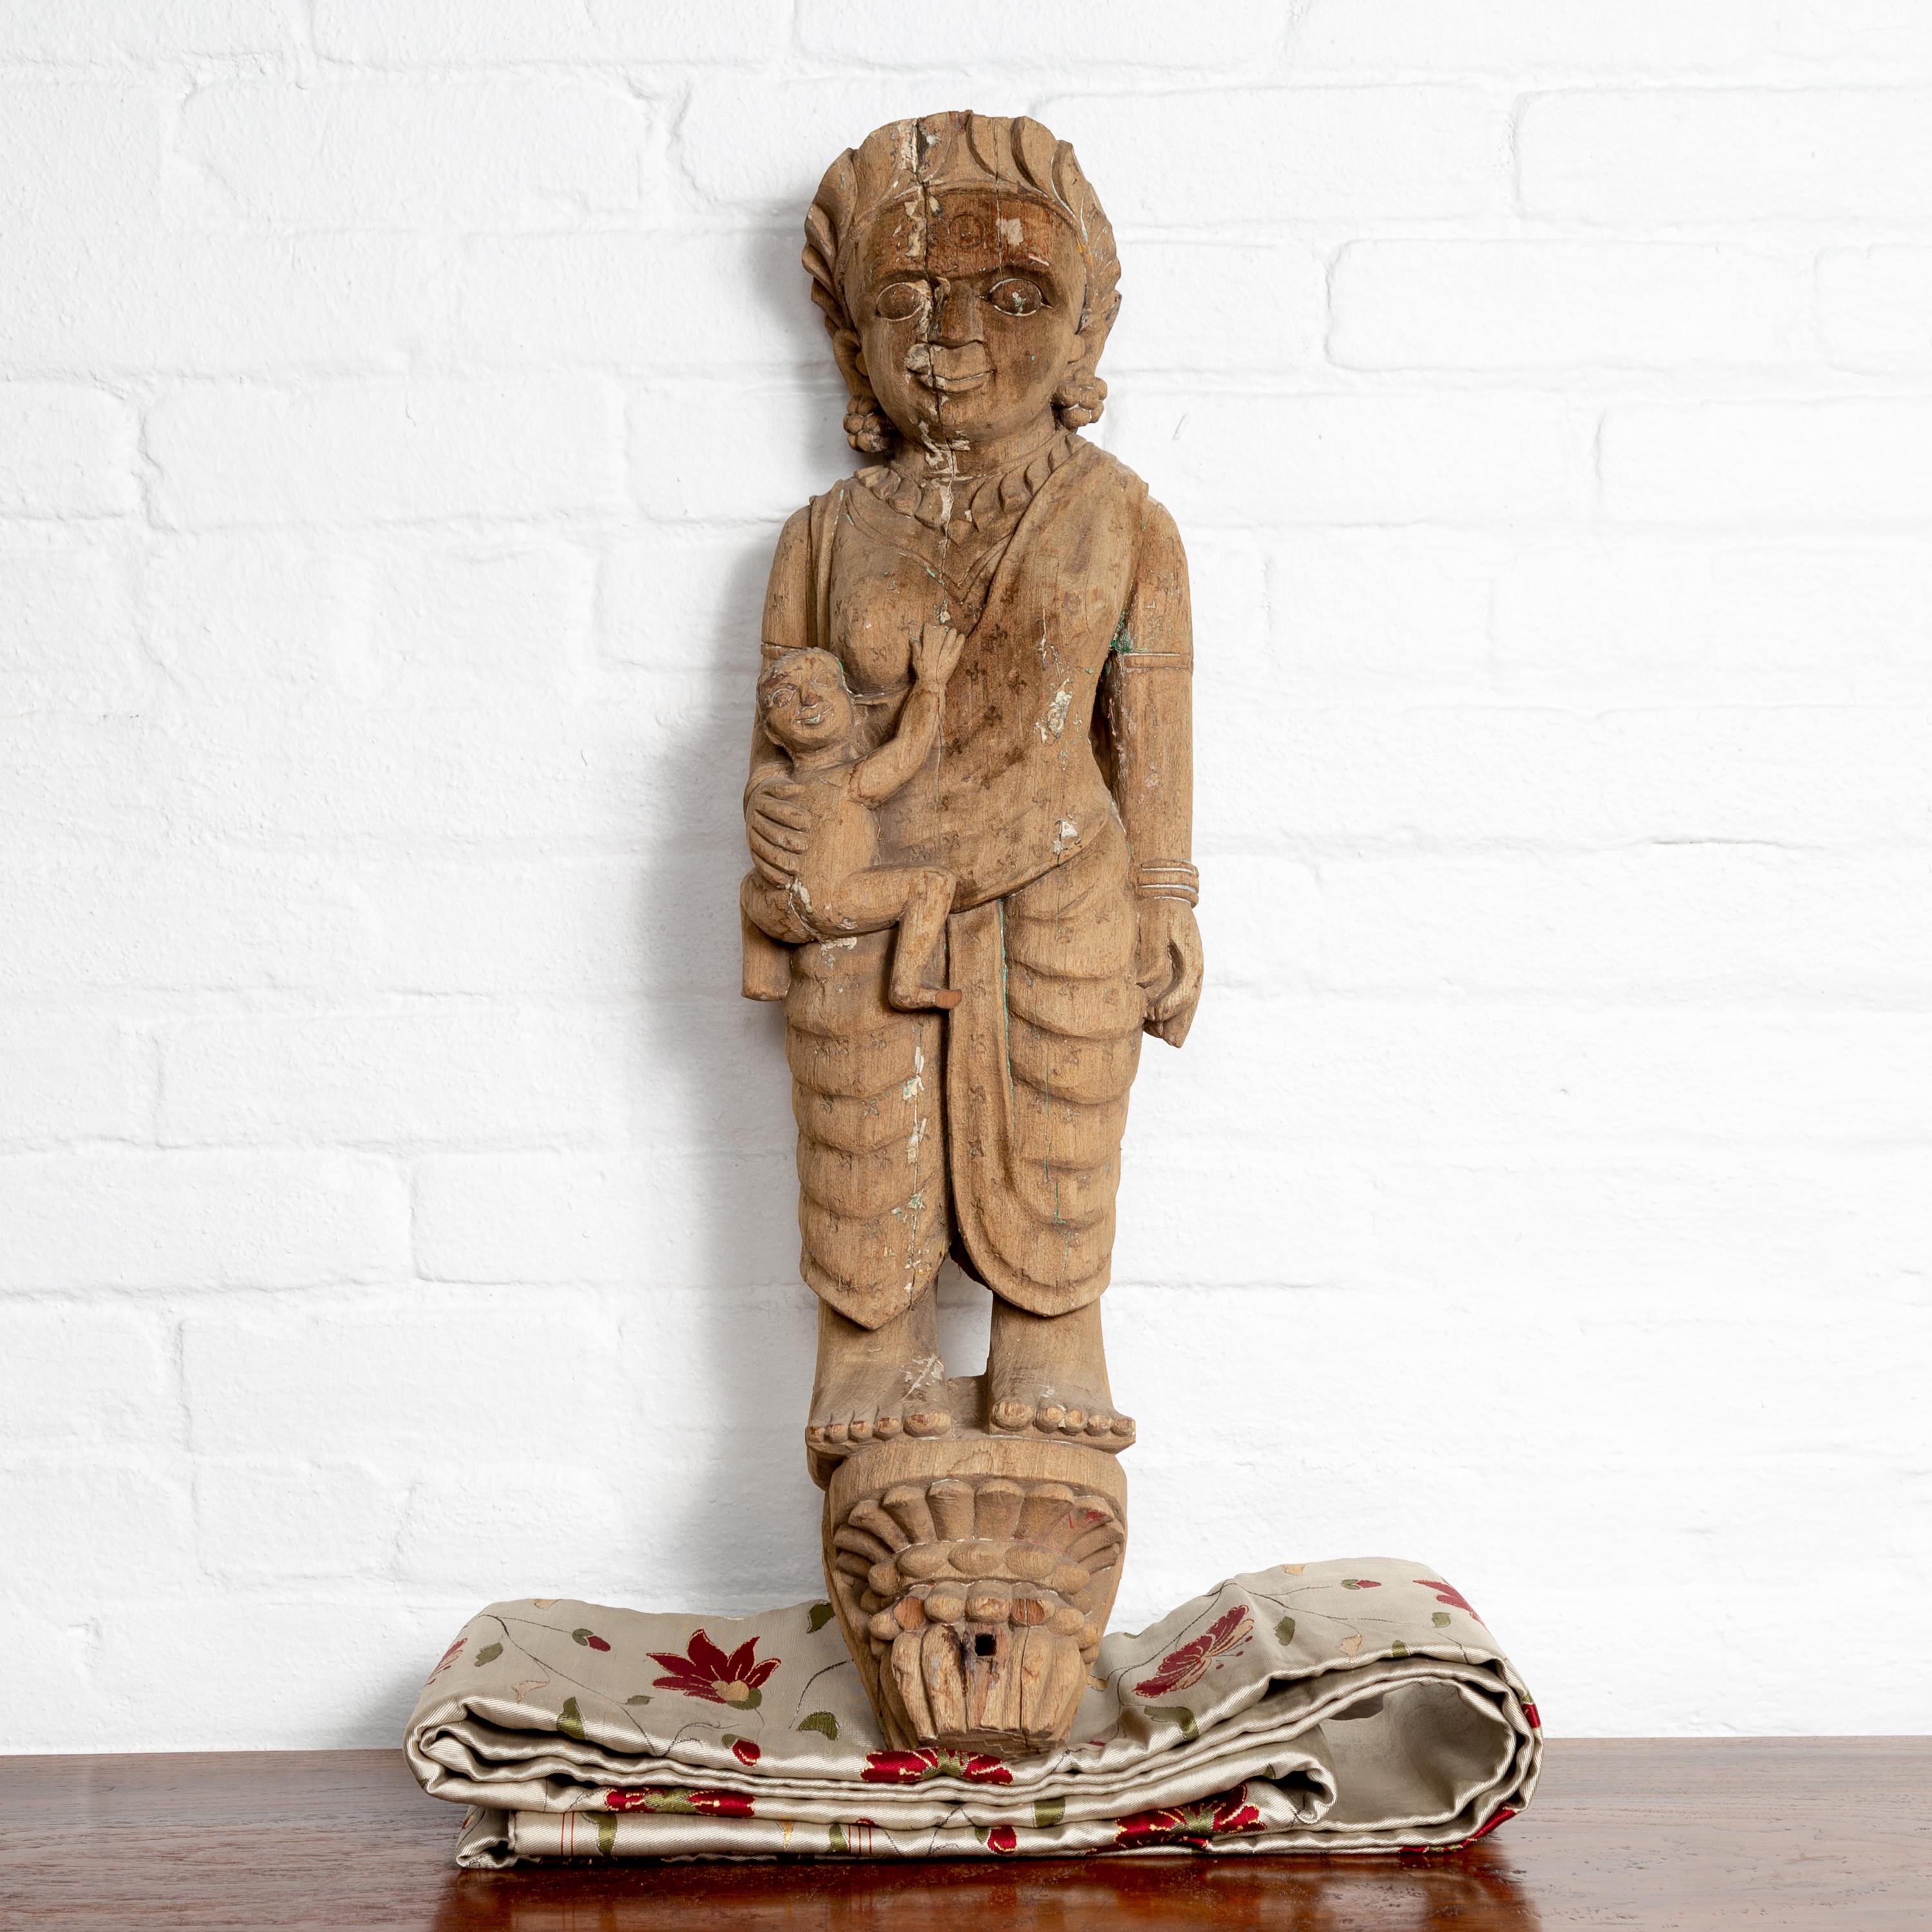 An Indian early 20th century hand carved architectural temple carving from Gujarat, depicting a mother and her child with nicely weathered patina. Crafted in the Western portion of India, in the culturally rich state of Gujarat, this early